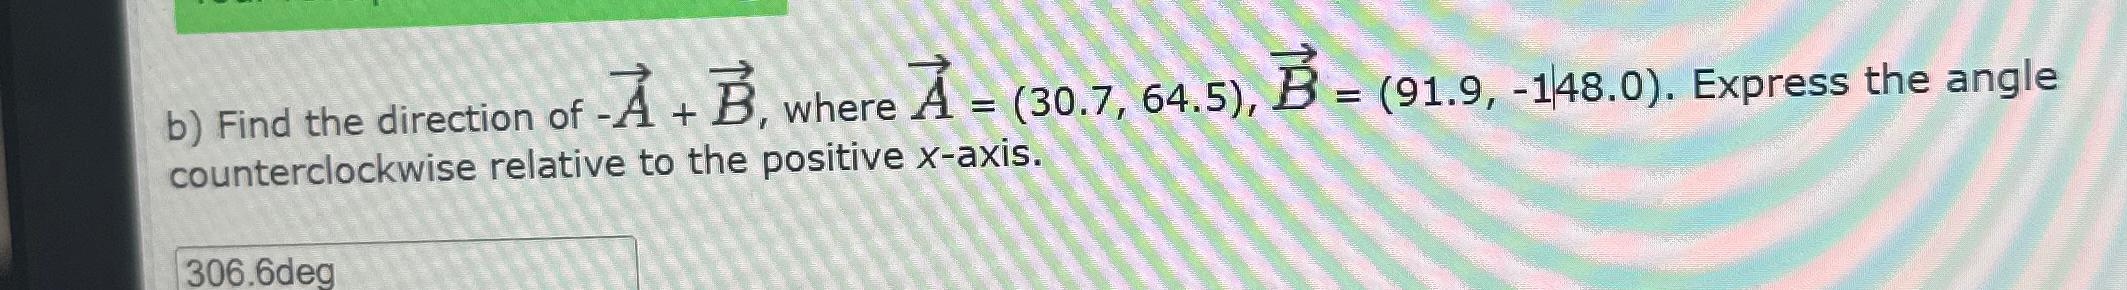 b) Find the direction of -A + B, where A = (30.7, 64.5), B = (91.9, -148.0). Express the angle